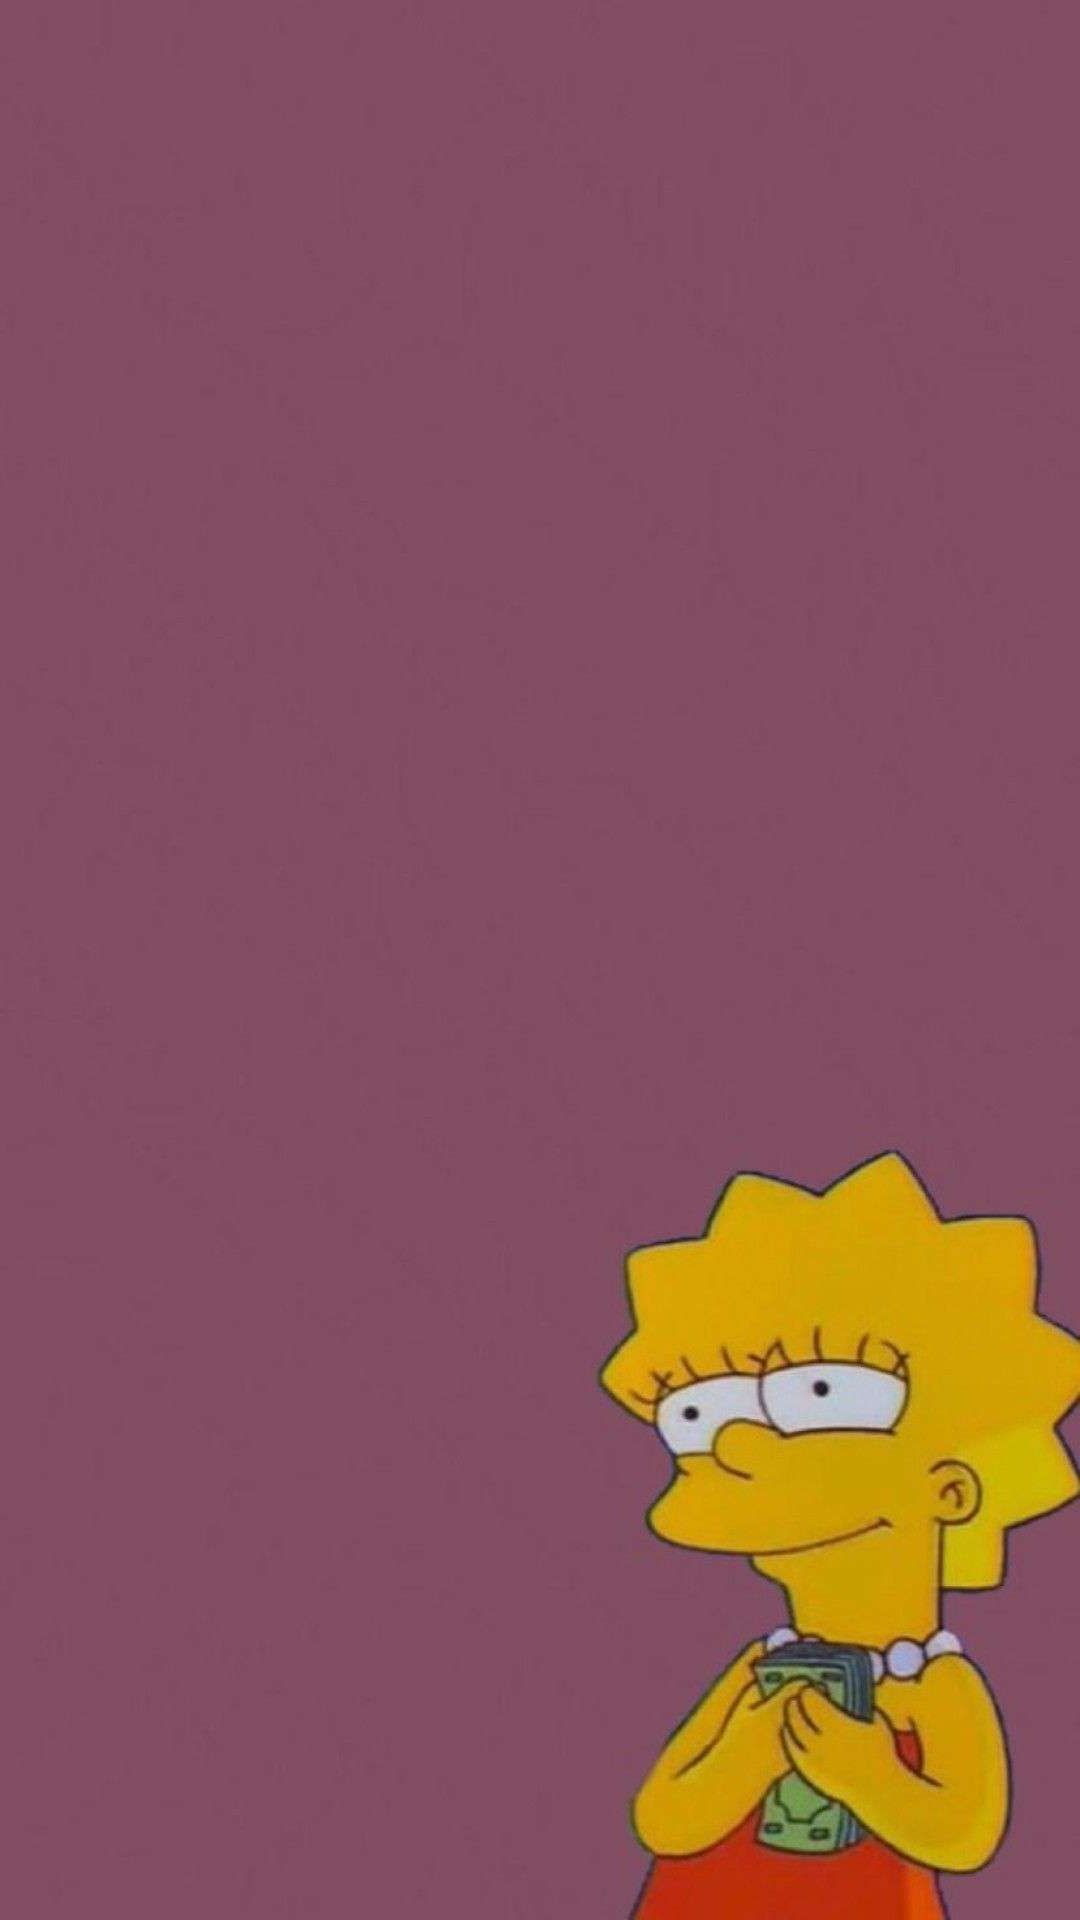 Lisa Simpson Wallpaper for mobile phone, tablet, desktop computer and other devices HD and 4K wallpaper. Simpson, Lisa simpson, Yeardley smith